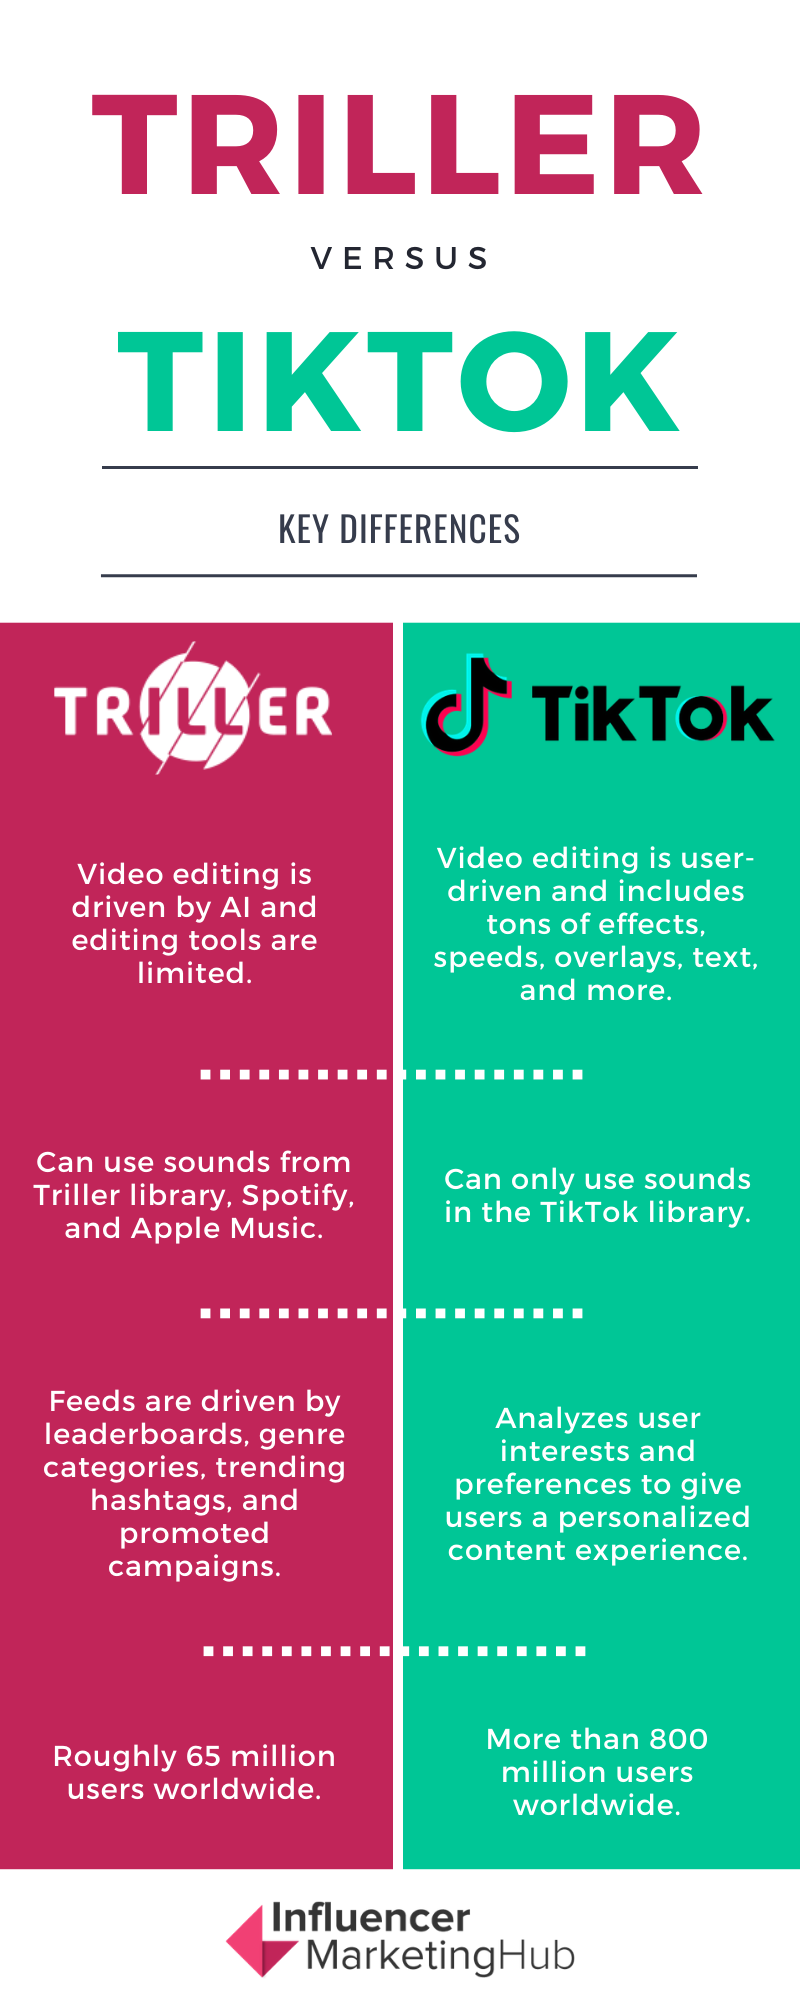 Why is Triller better than TikTok?